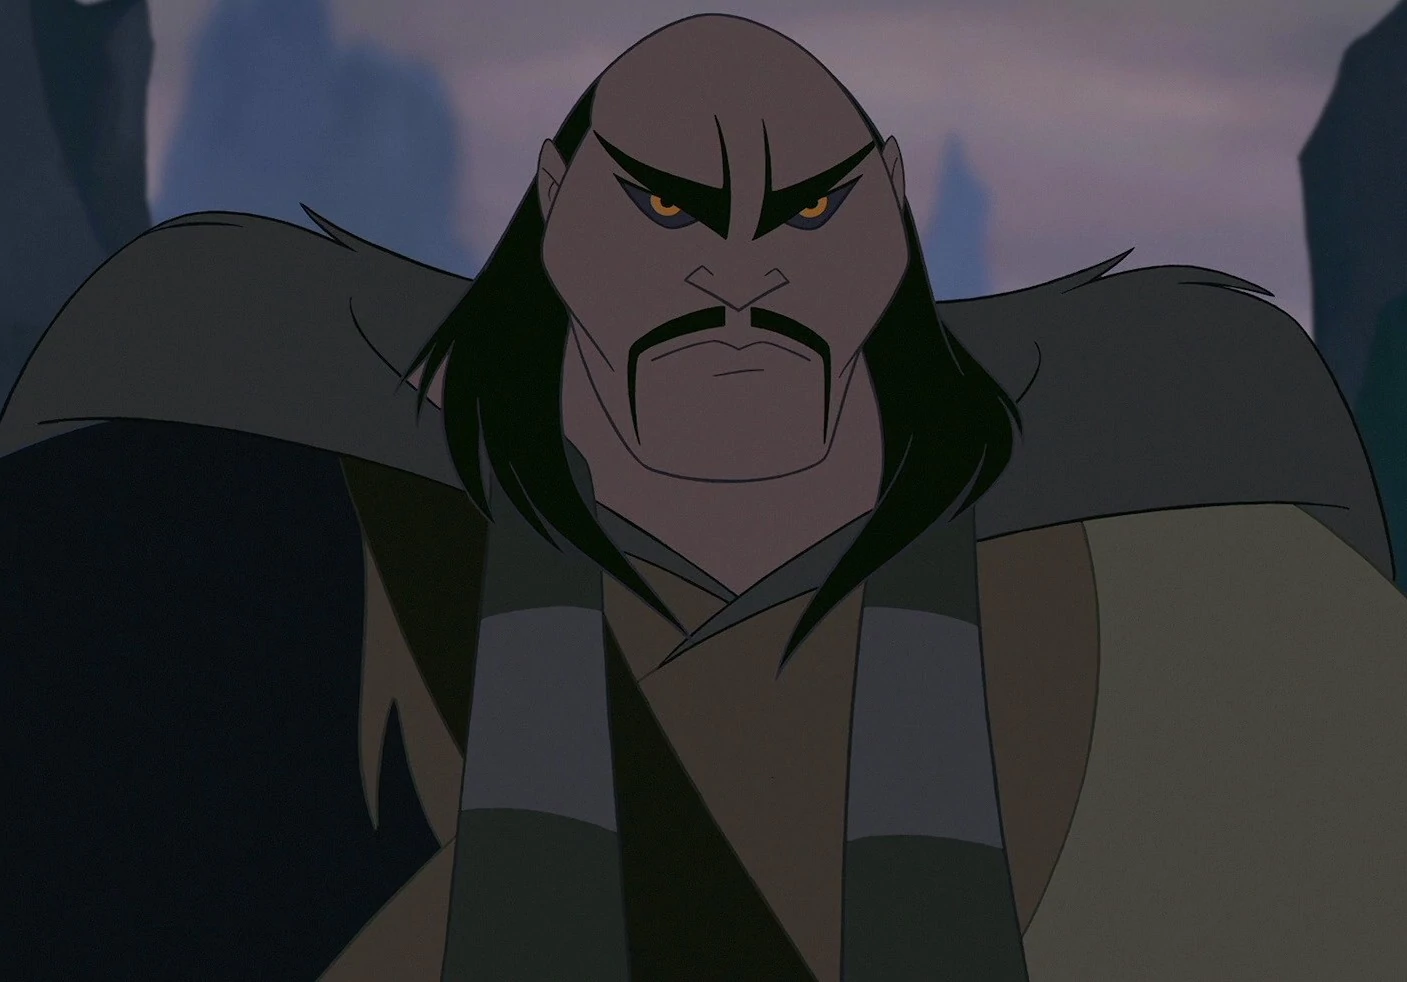 shan yu frowning scarily